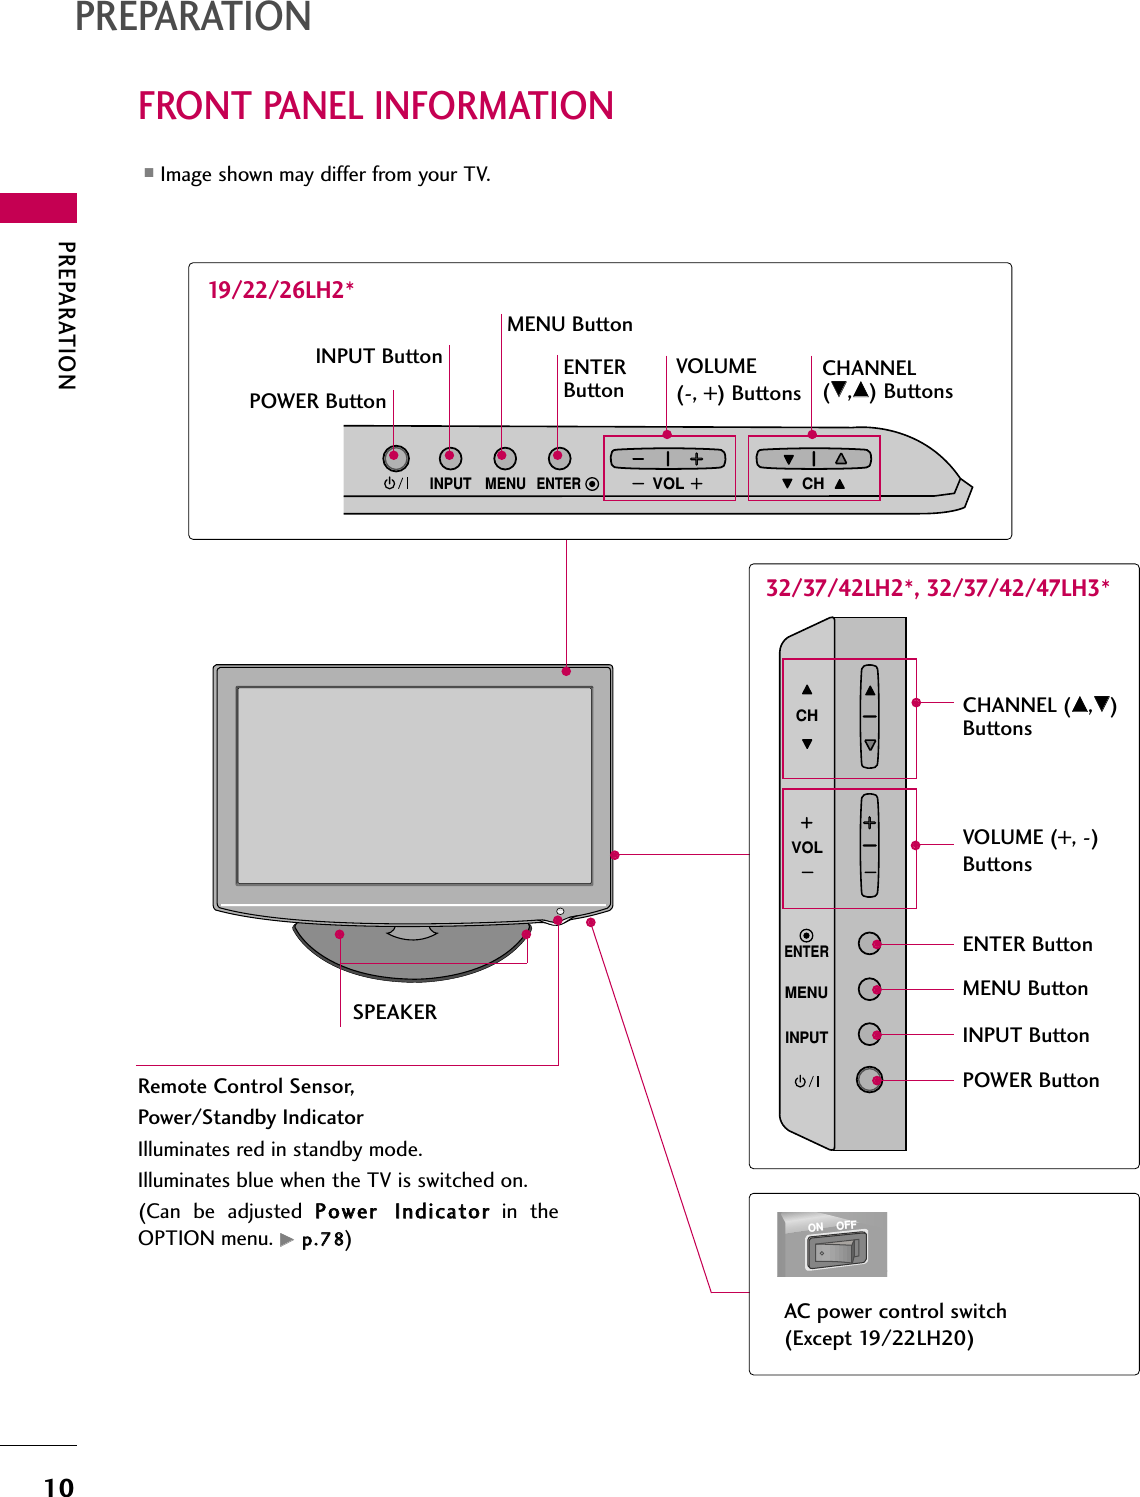 PREPARATION10FRONT PANEL INFORMATIONPREPARATION■Image shown may differ from your TV.32/37/42LH2*, 32/37/42/47LH3*INPUT MENUVOL CHENTERCHANNEL(EE,DD) ButtonsVOLUME (-, +) ButtonsENTERButton19/22/26LH2*MENU ButtonPOWER ButtonINPUT ButtonINPUTMENUENTERCHVOLCHANNEL (DD,EE)ButtonsVOLUME (+, -) ButtonsENTER ButtonMENU ButtonINPUT ButtonPOWER ButtonSPEAKERRemote Control Sensor,Power/Standby IndicatorIlluminates red in standby mode.Illuminates blue when the TV is switched on.(Can  be  adjusted  PPoowweerr  IInnddiiccaattoorrin  theOPTION menu. GGpp..7788)AC power control switch (Except 19/22LH20)ONOFF